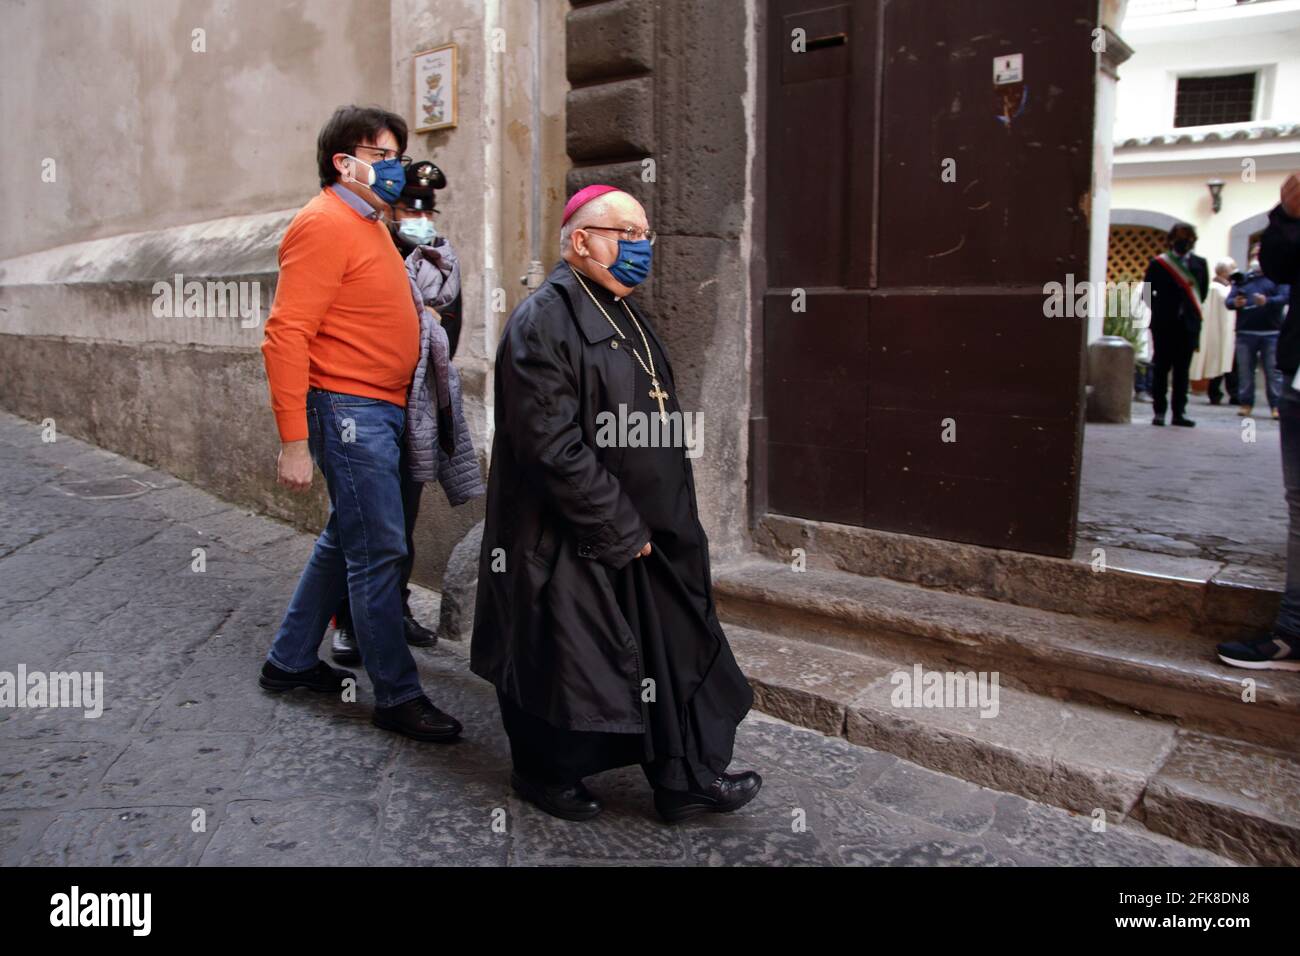 The Bishop of the Diocese Nocera-Sarno with protective mask is entering the Sanctuary for the celebration of Holy Mass behind closed doors. Stock Photo